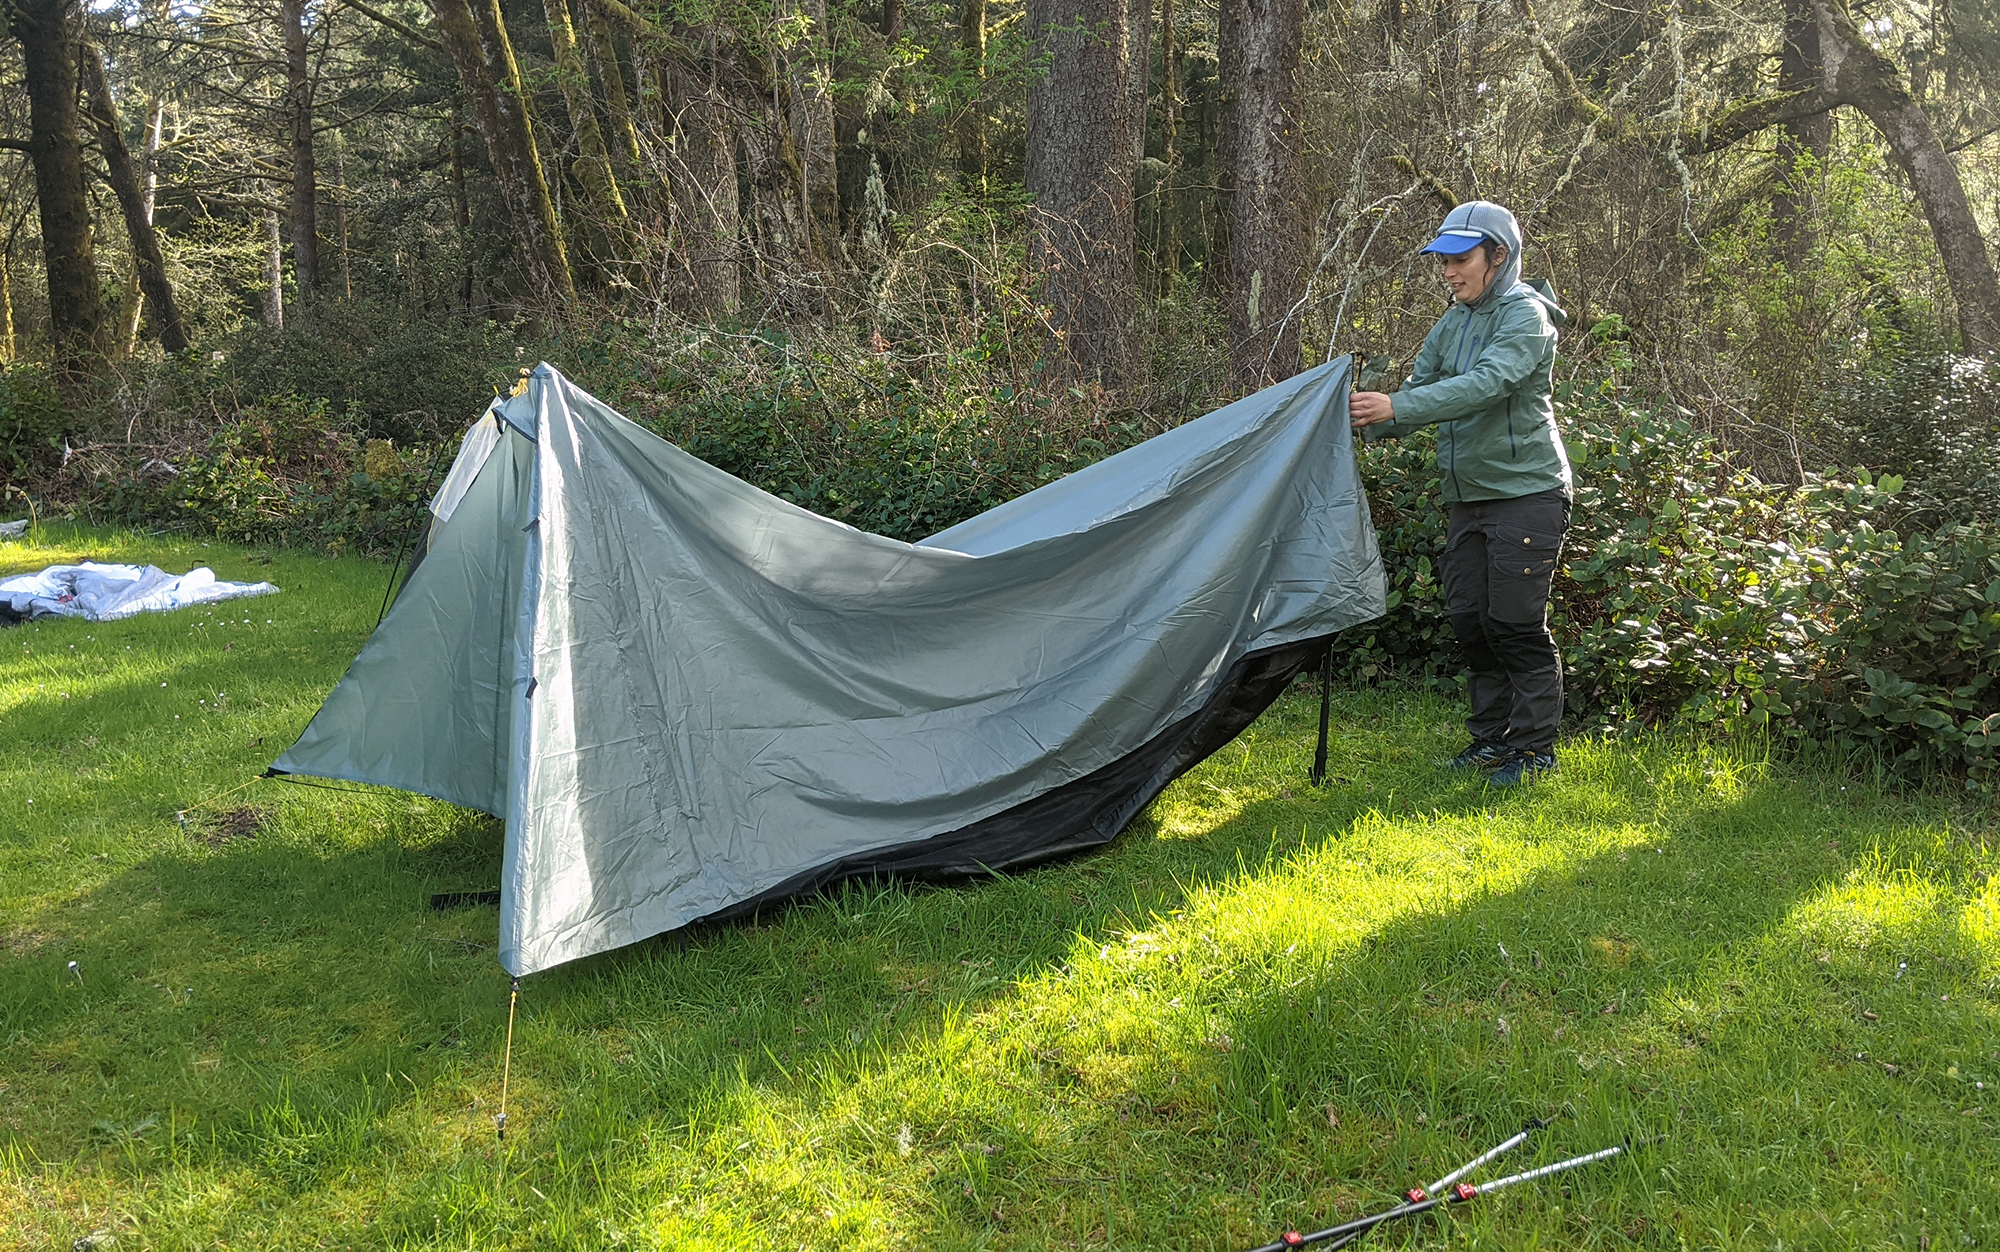 One of our testers found she had better luck setting up the Tarptent Protrail front-to-back rather than back-to-front to compensate for the limitations of a shorter wingspan.